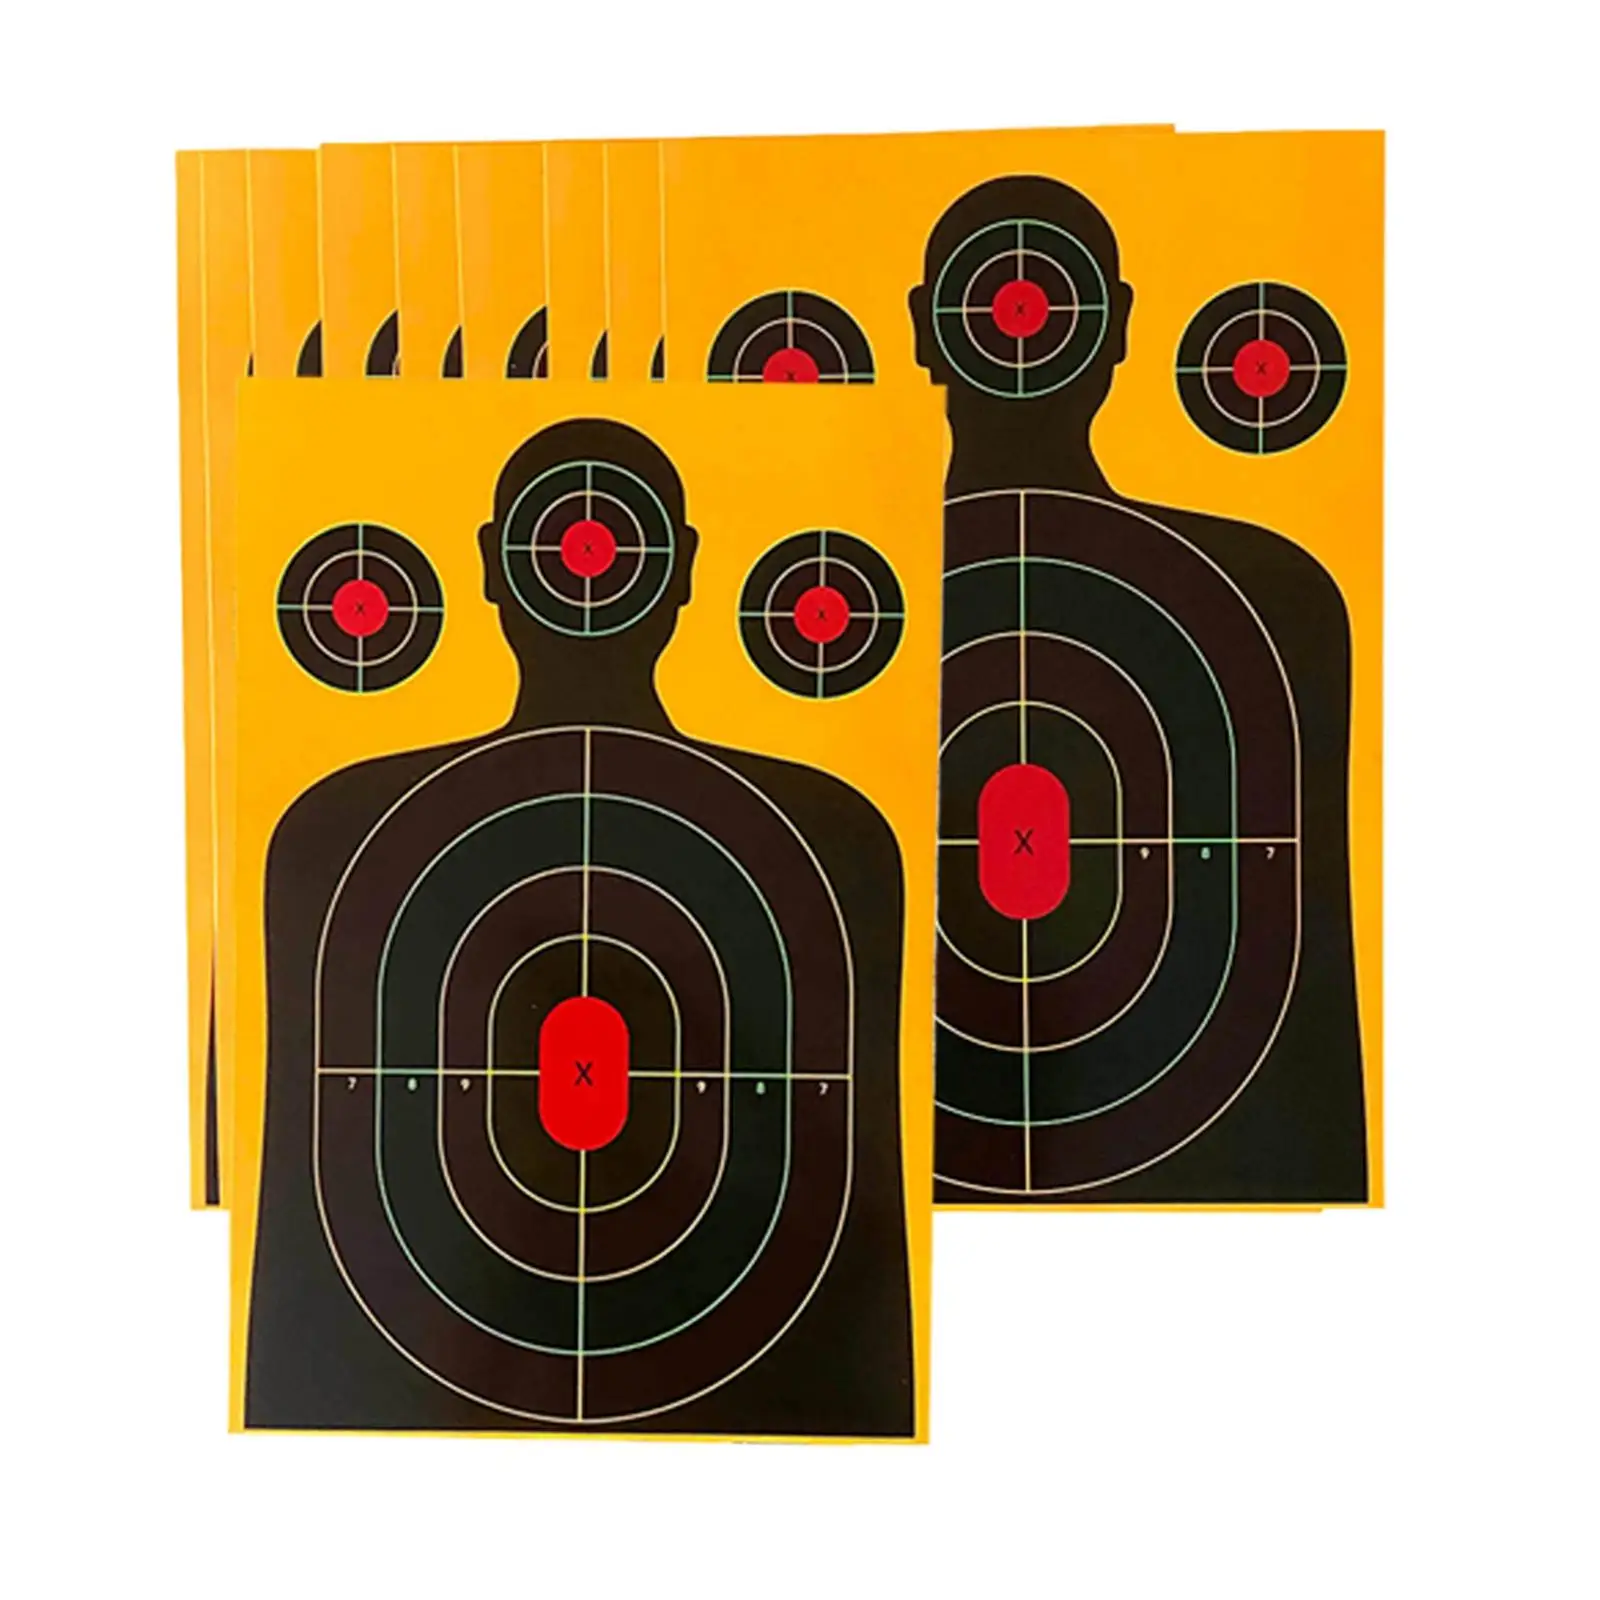 10x Silhouette Target Wargame without Stand Hunting Practice Hunting Training Catapults Sport Letter Partition Training Target